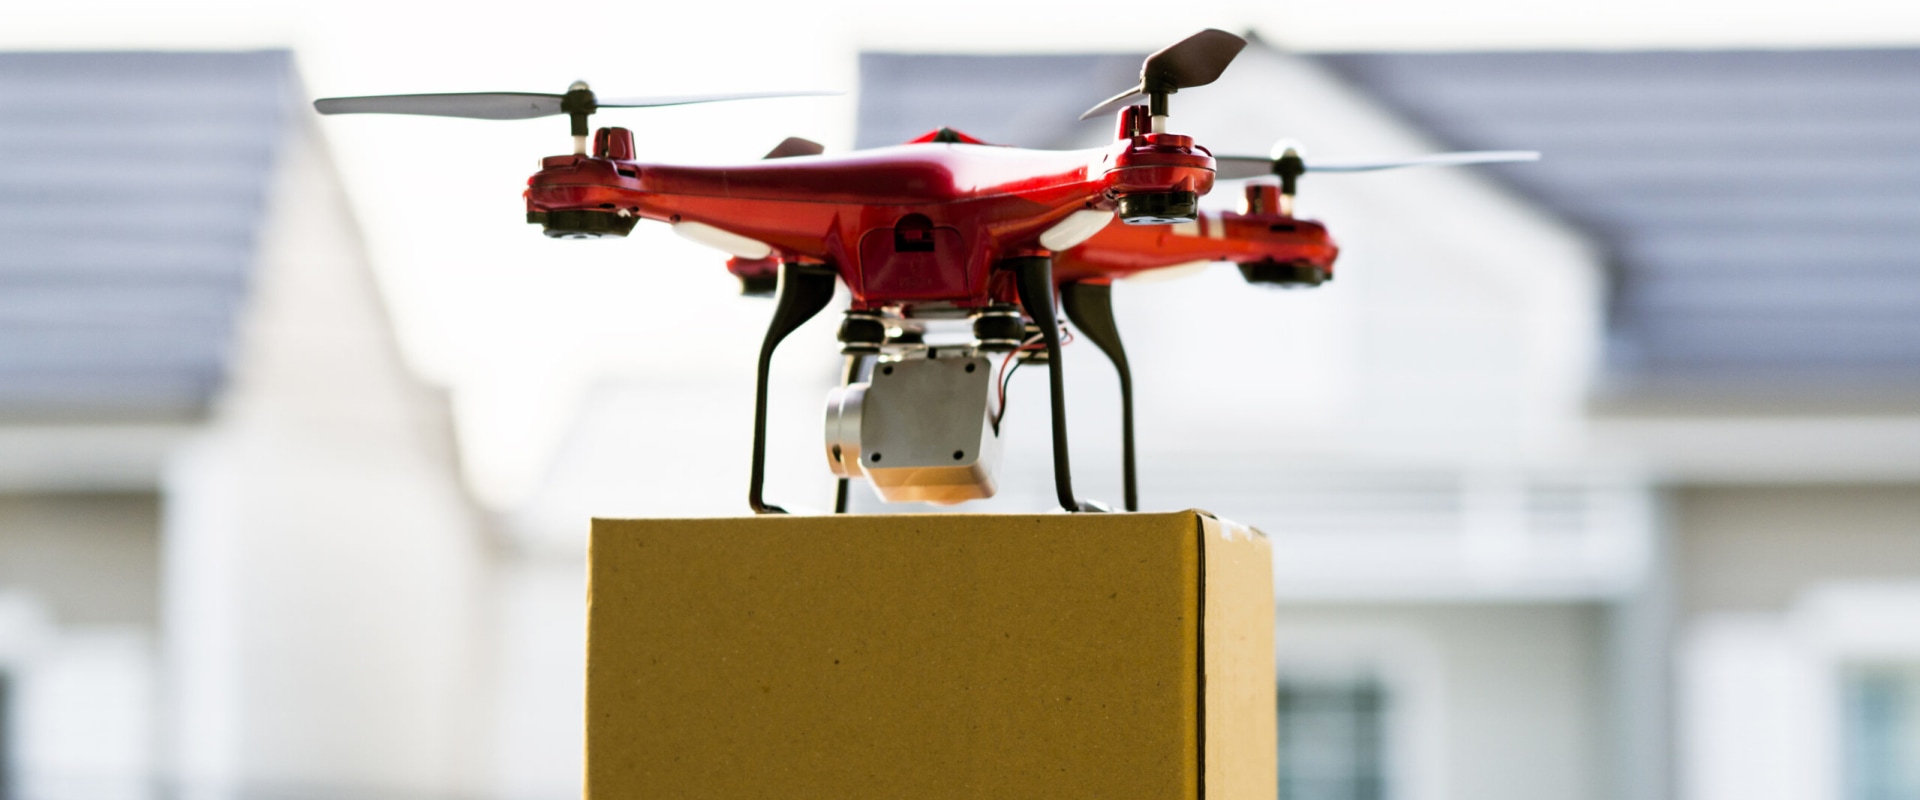 Data Privacy Considerations with Drone Use